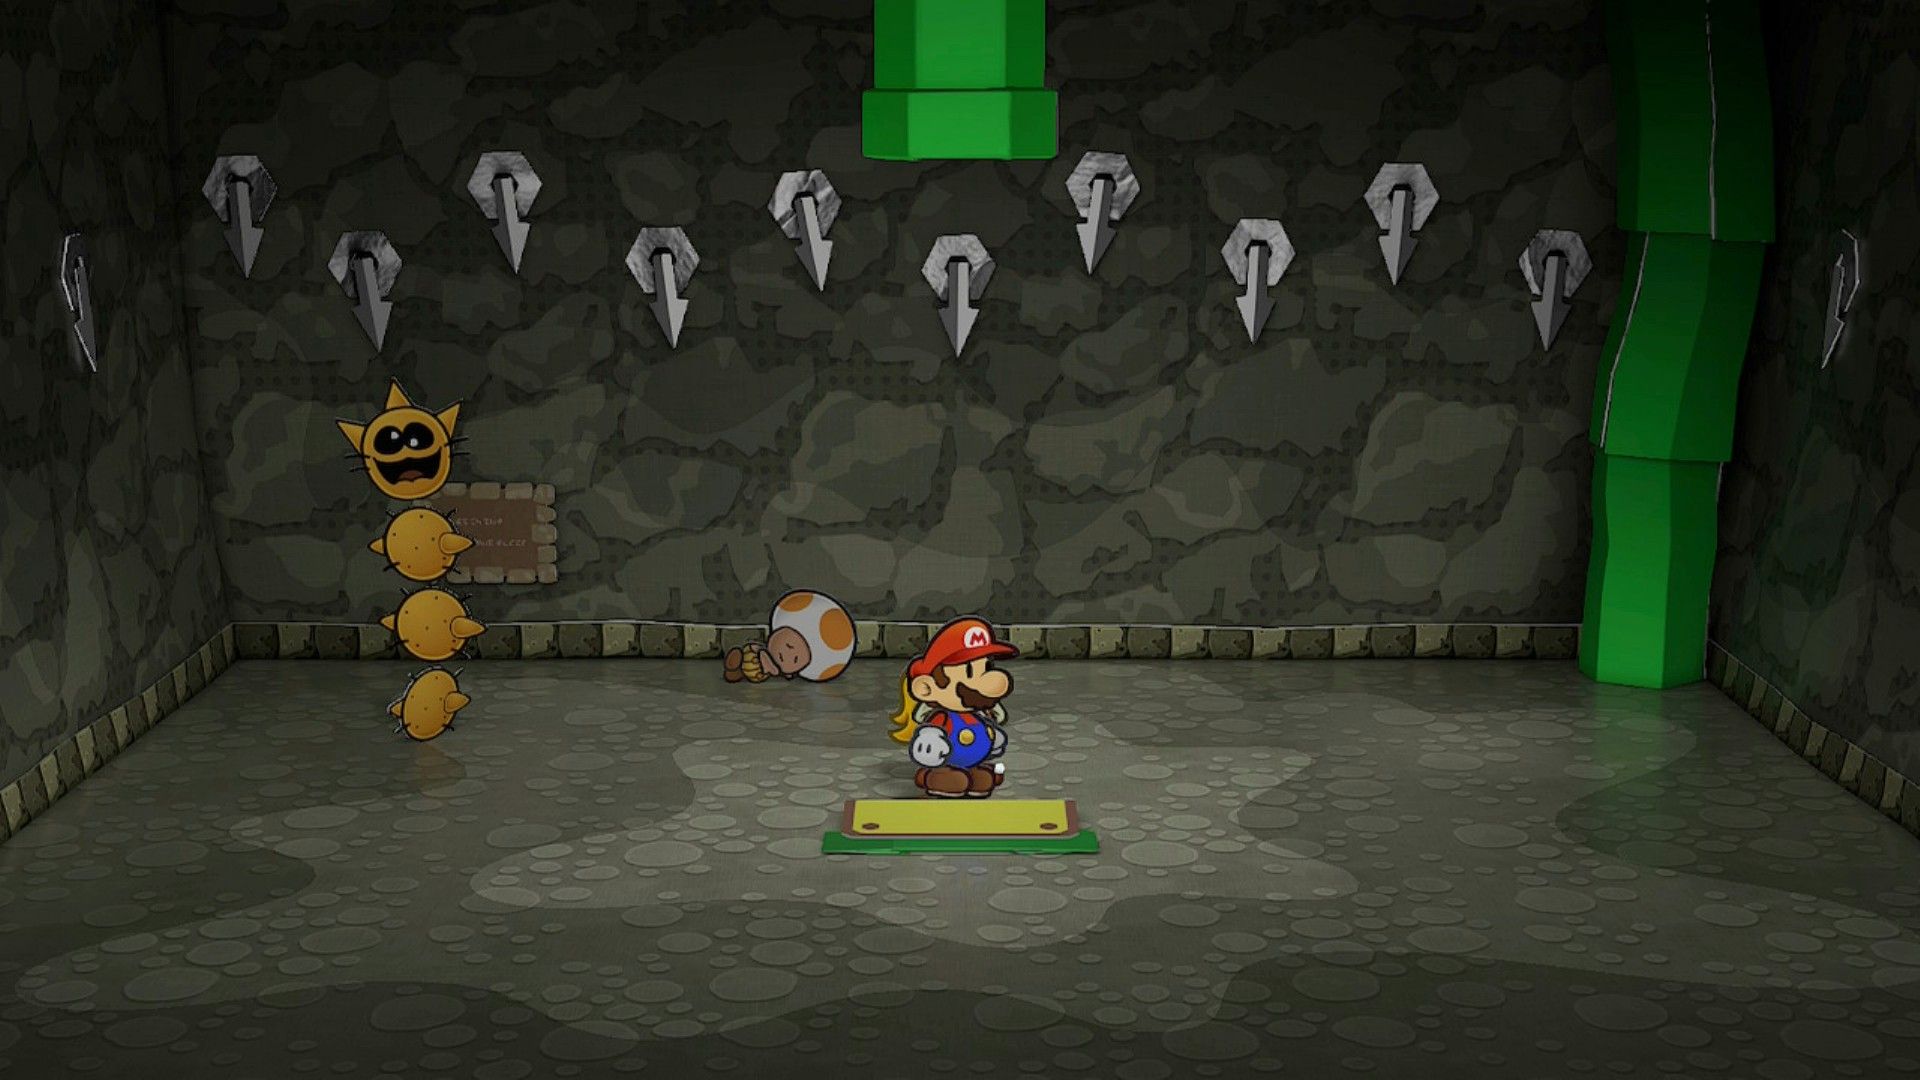 Paper Mario: The Thousand-Year Door - Pit of 100 Trials Pine T. Sr. passed out